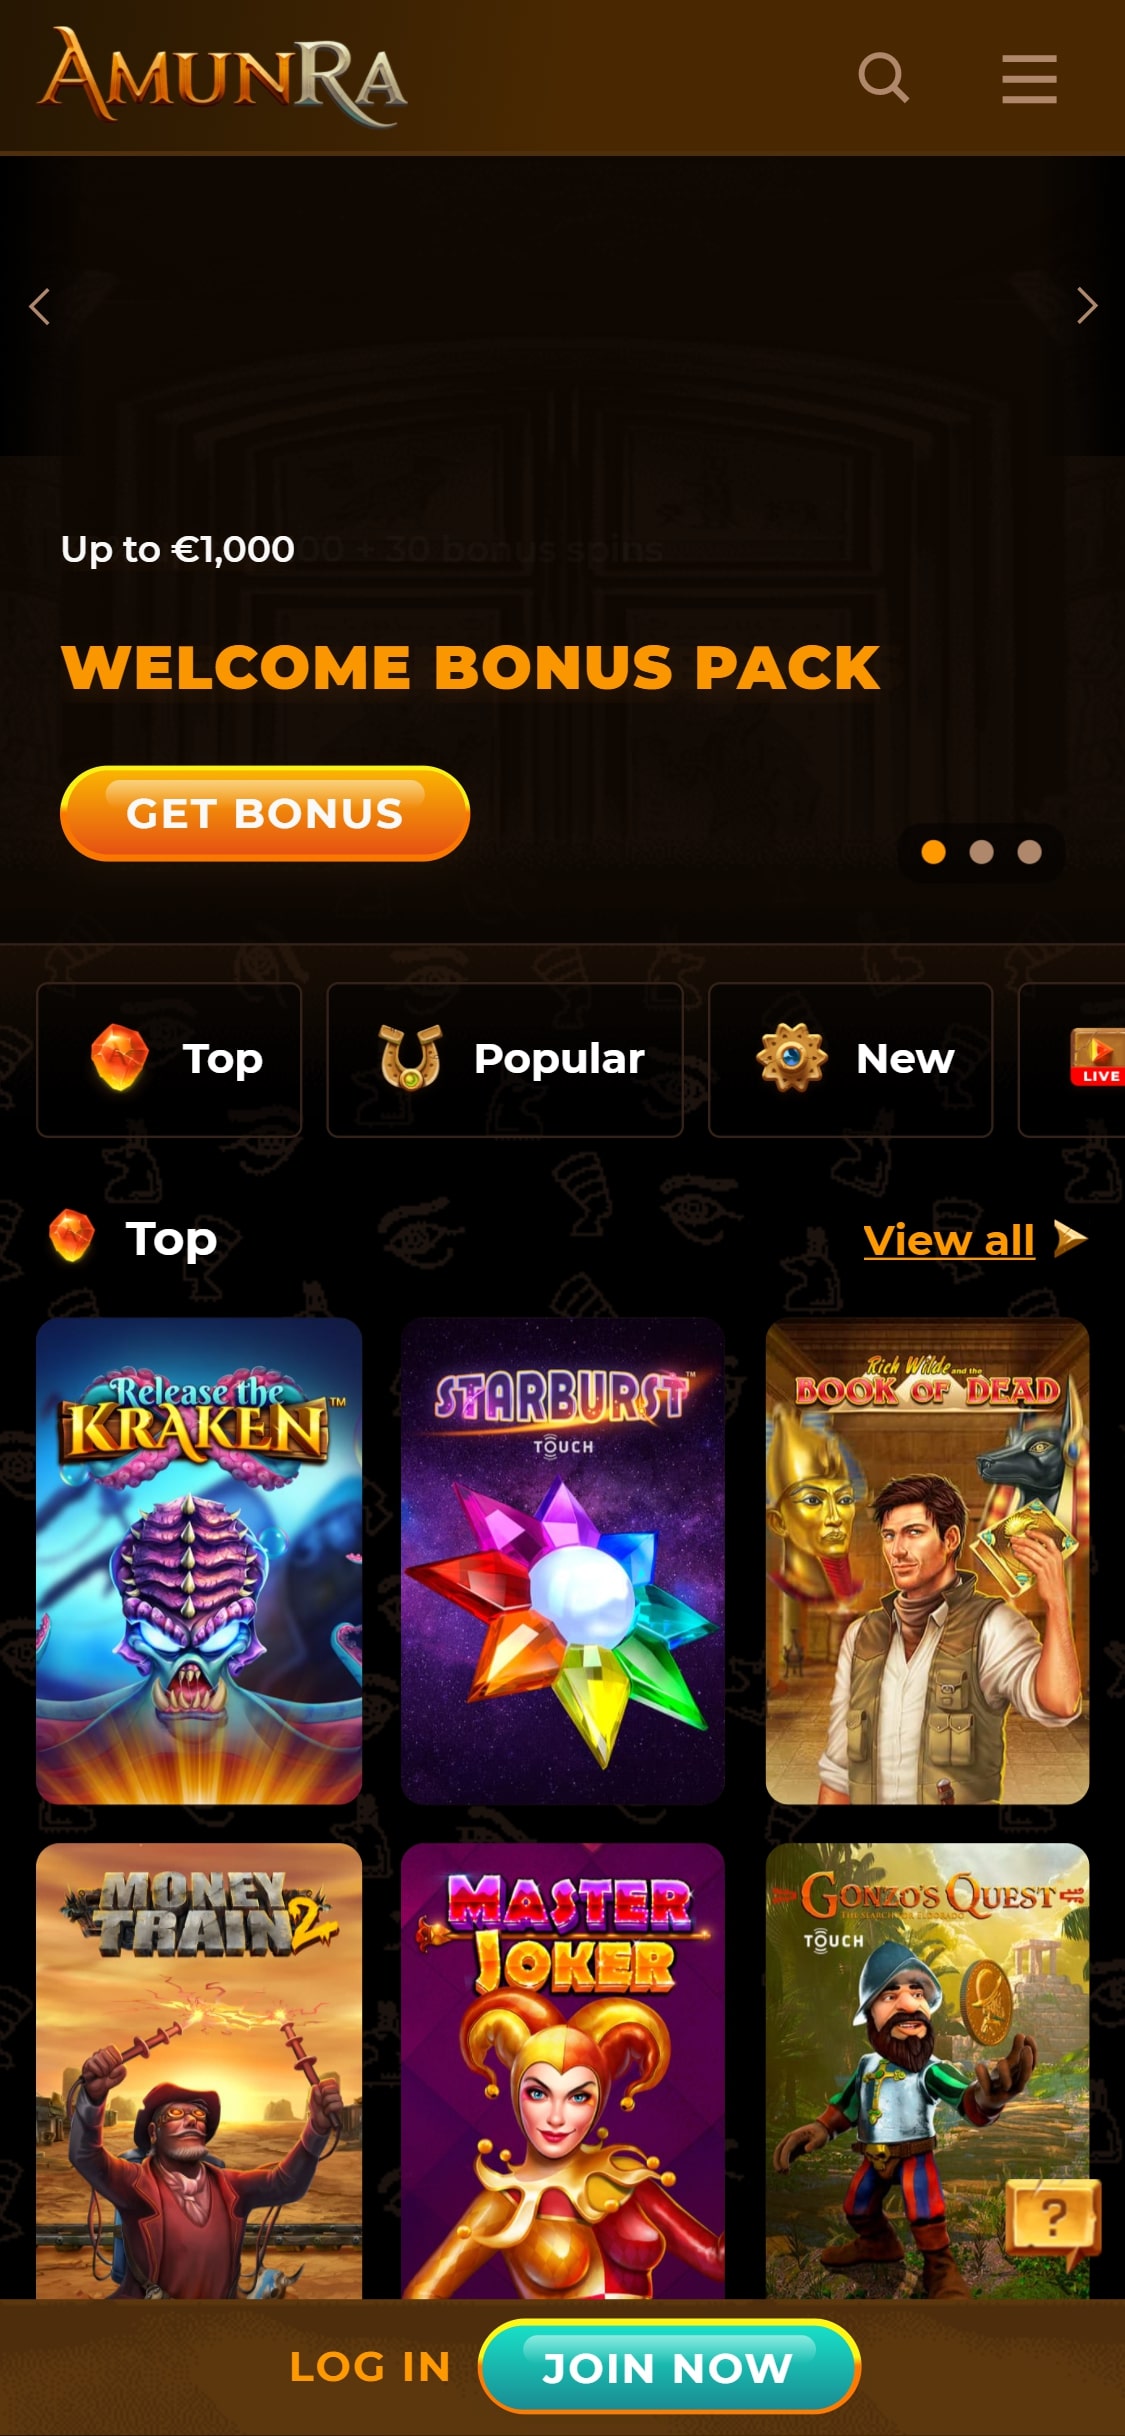 Amunra Casino Mobile Review